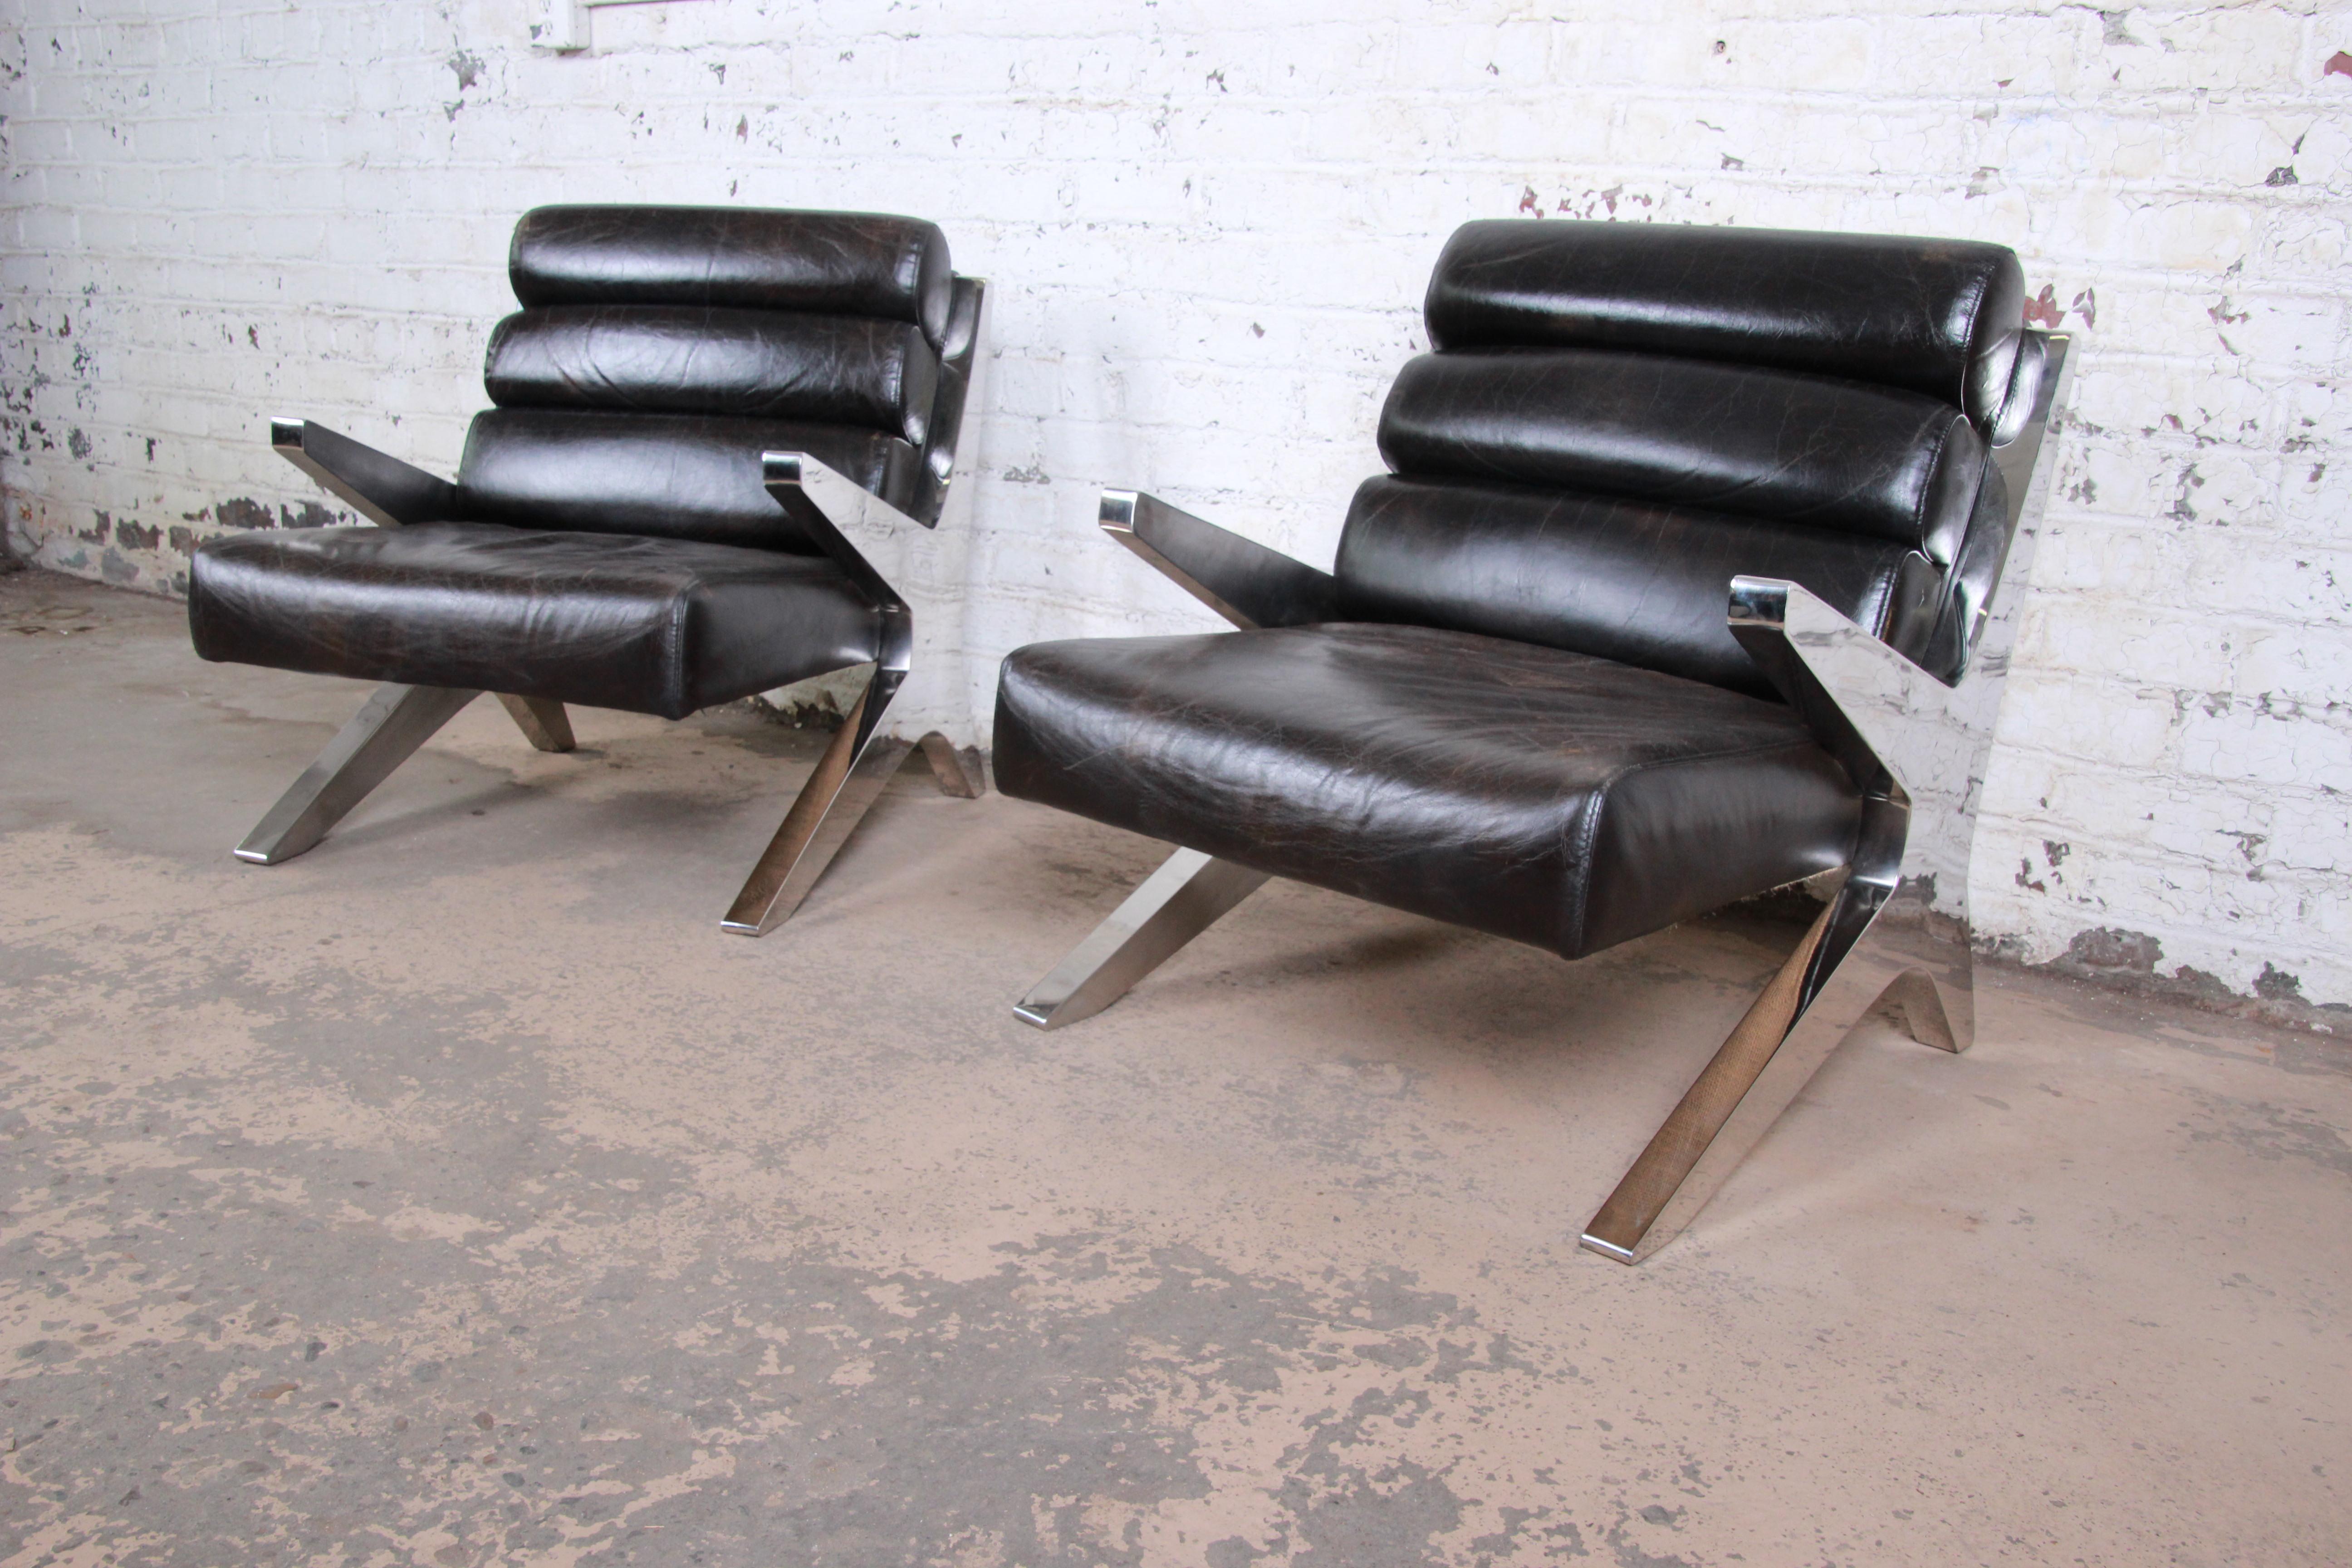 An outstanding pair of Mid-Century Modern lounge chairs, circa 1970s. The chairs feature stunning chrome frames in a scissor form and high grade dark brown leather. True statement pieces for any modern or Mid-Century Modern environment. The chairs